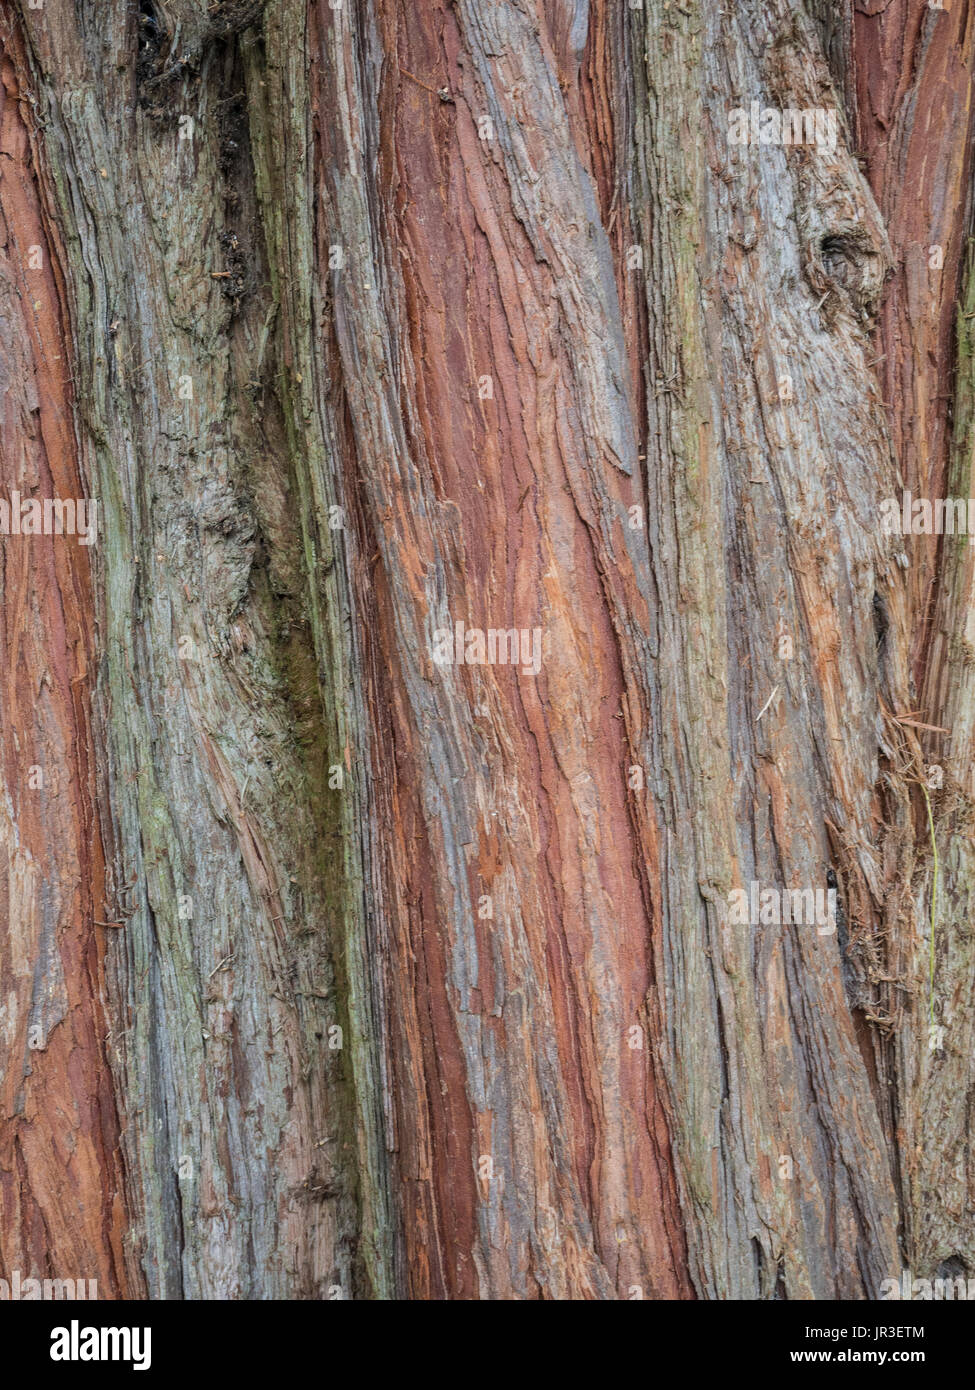 The deeply furrowed bark of the incense cedar Calocedrus decurrens Stock Photo